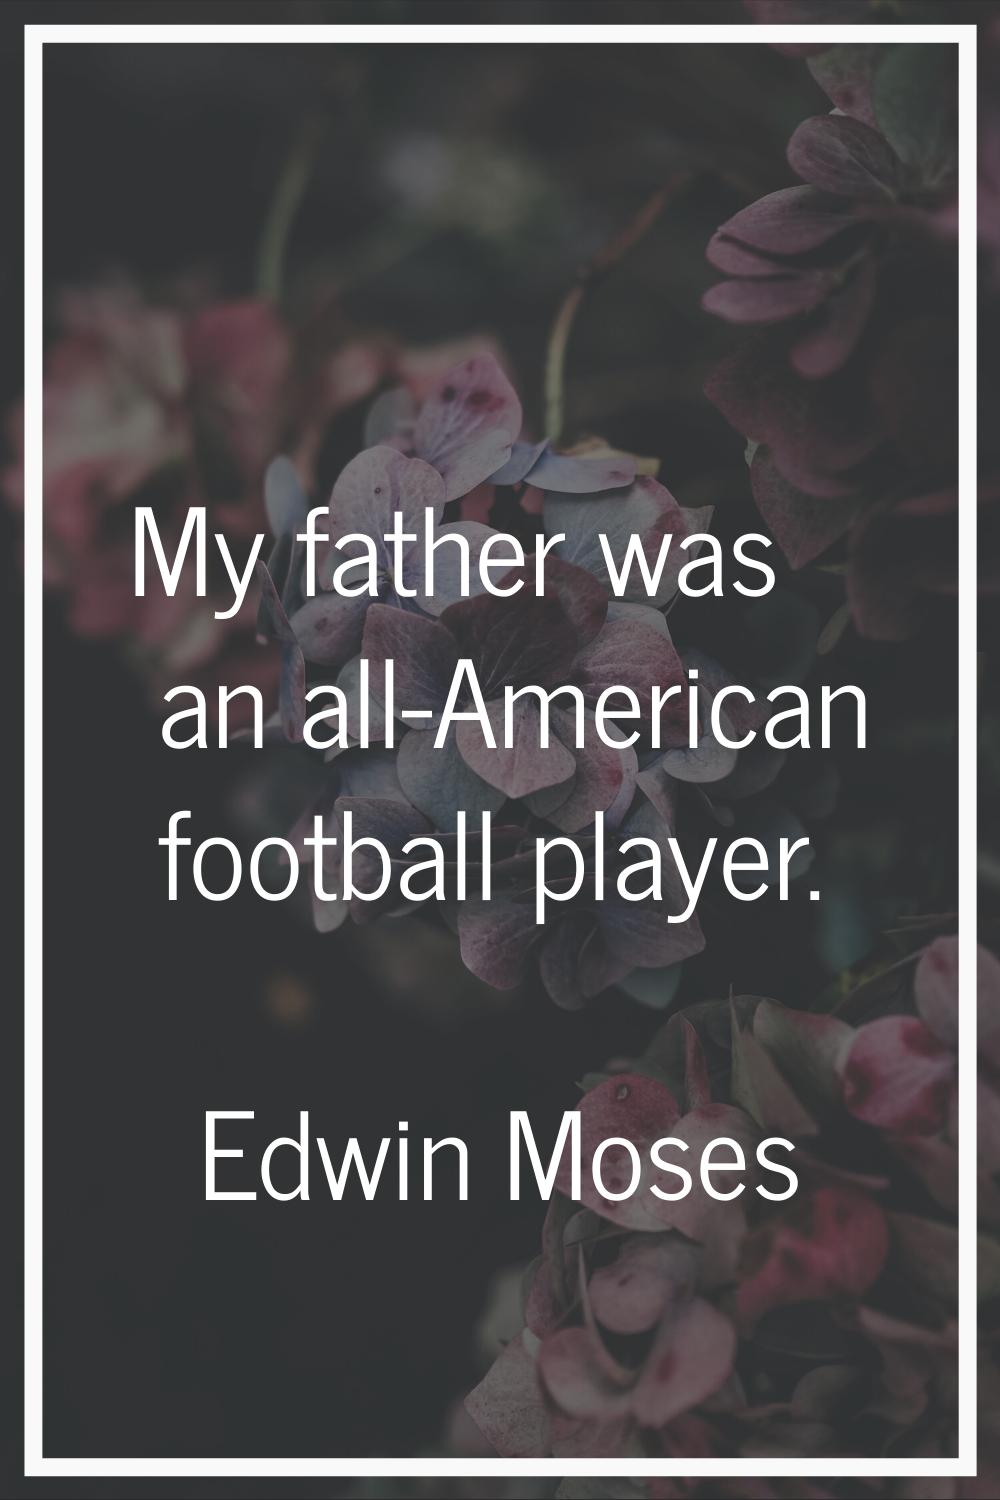 My father was an all-American football player.